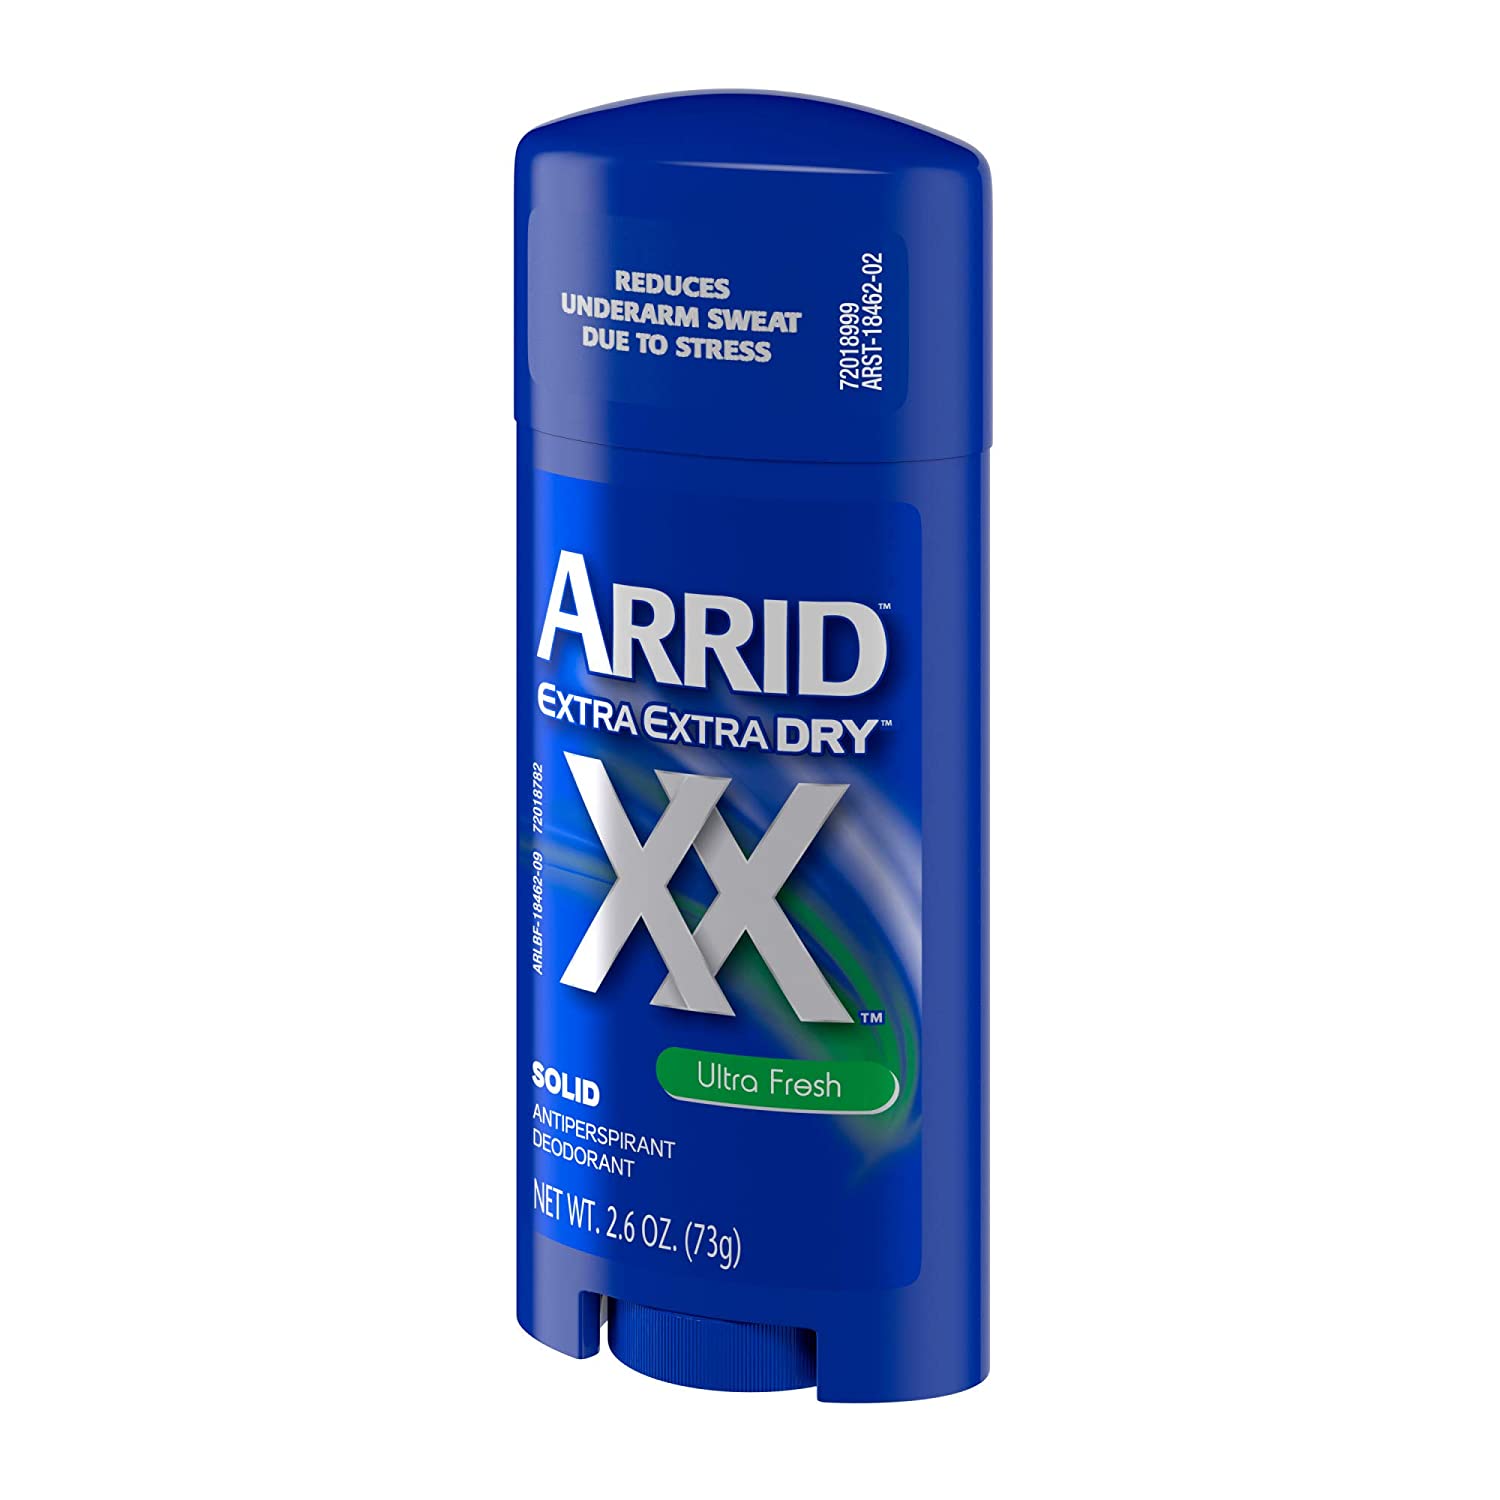 2.6-Oz Arrid XX Extra Extra Dry Solid Antiperspirant Deodorant (Ultra Fresh) $1.36 + Free Shipping w/ Prime or orders of $25+